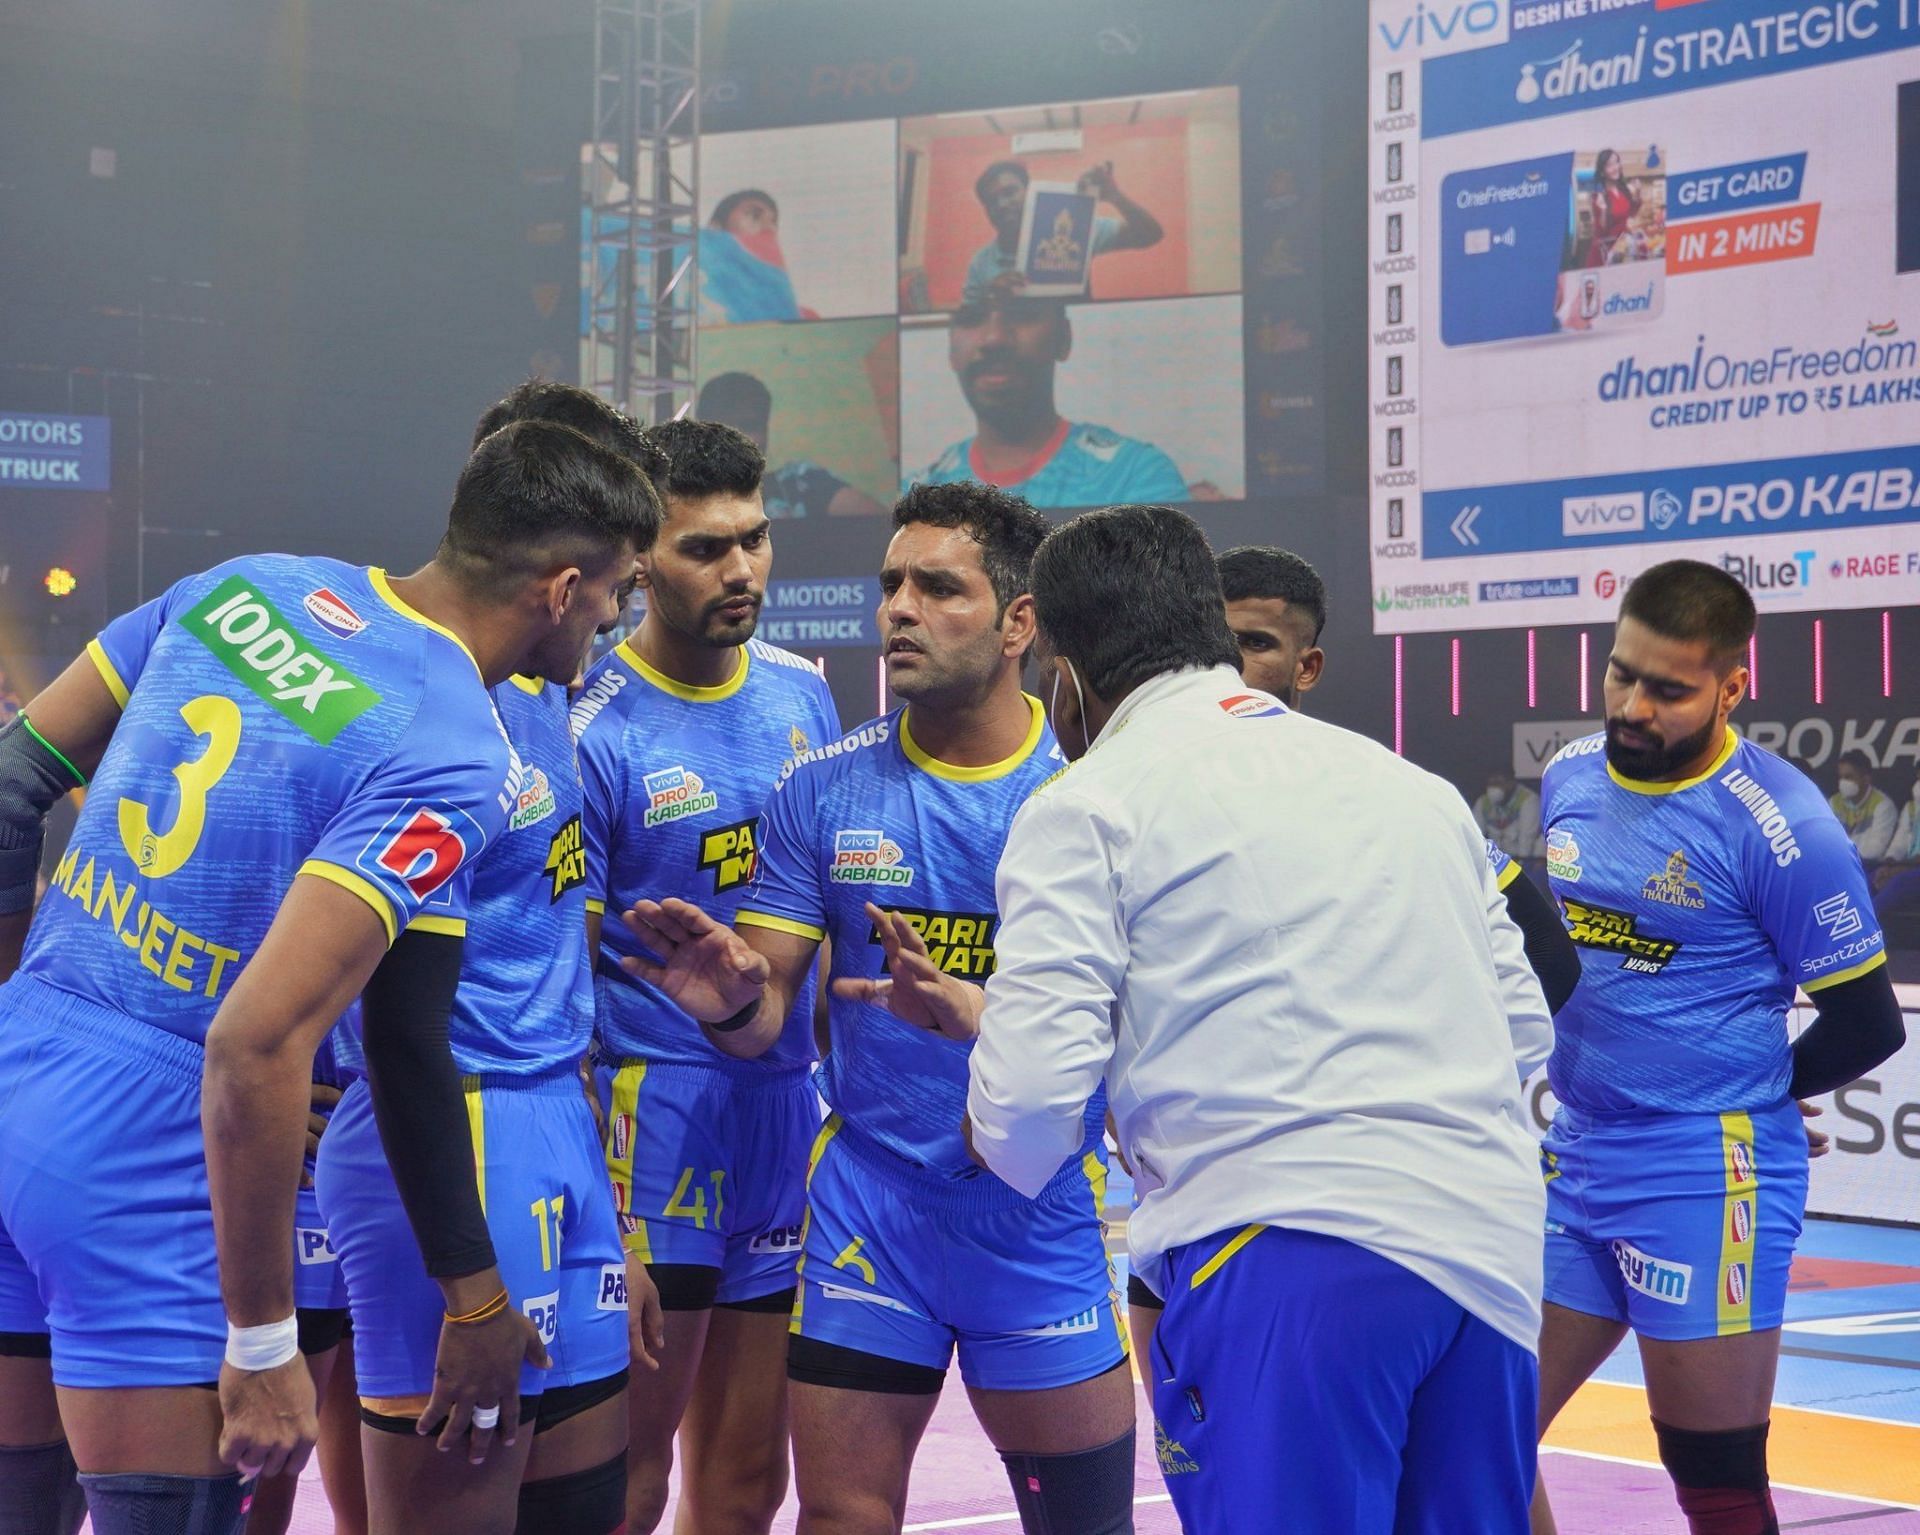 Tamil Thalaivas players discuss with their coach during a time-out - Image Courtesy: Tamil Thalaivas Twitter